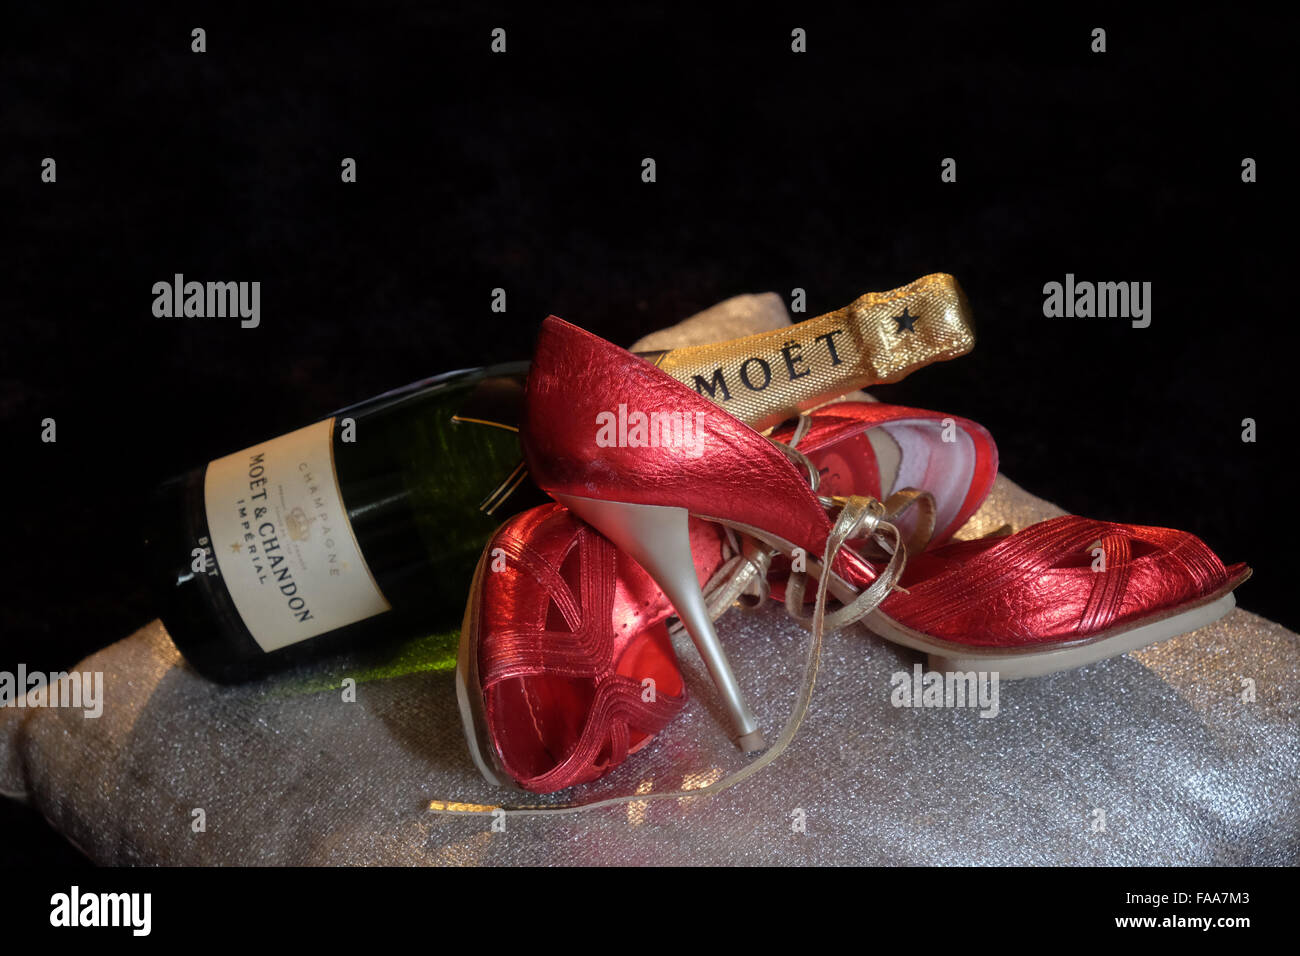 Christmas; celebration; Moet Champagne; Red; High heel; shoes Stock Photo